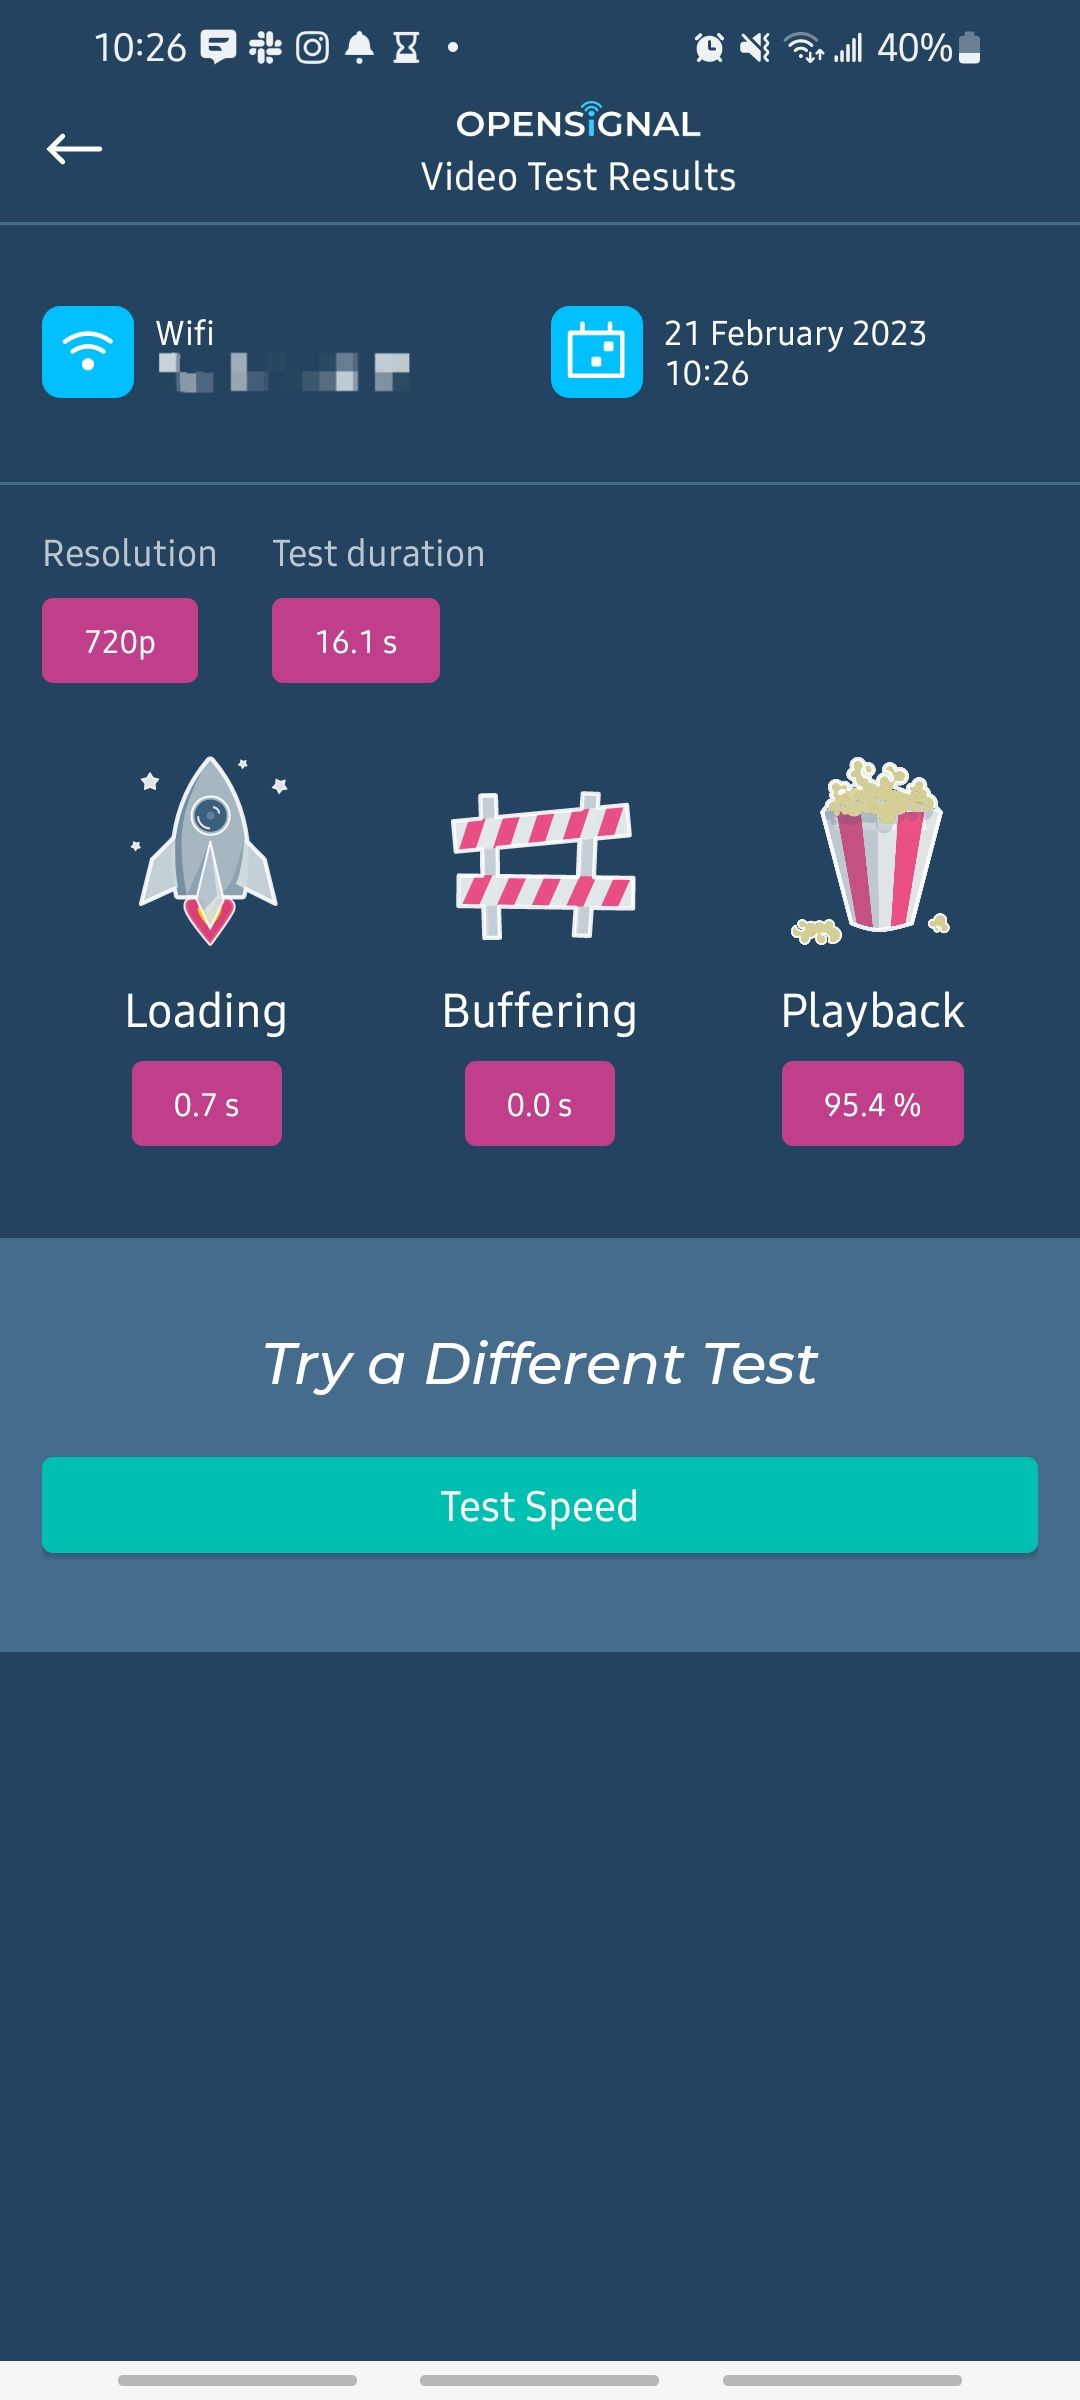 Screenshot of Speed Test Results in the Opensignal app